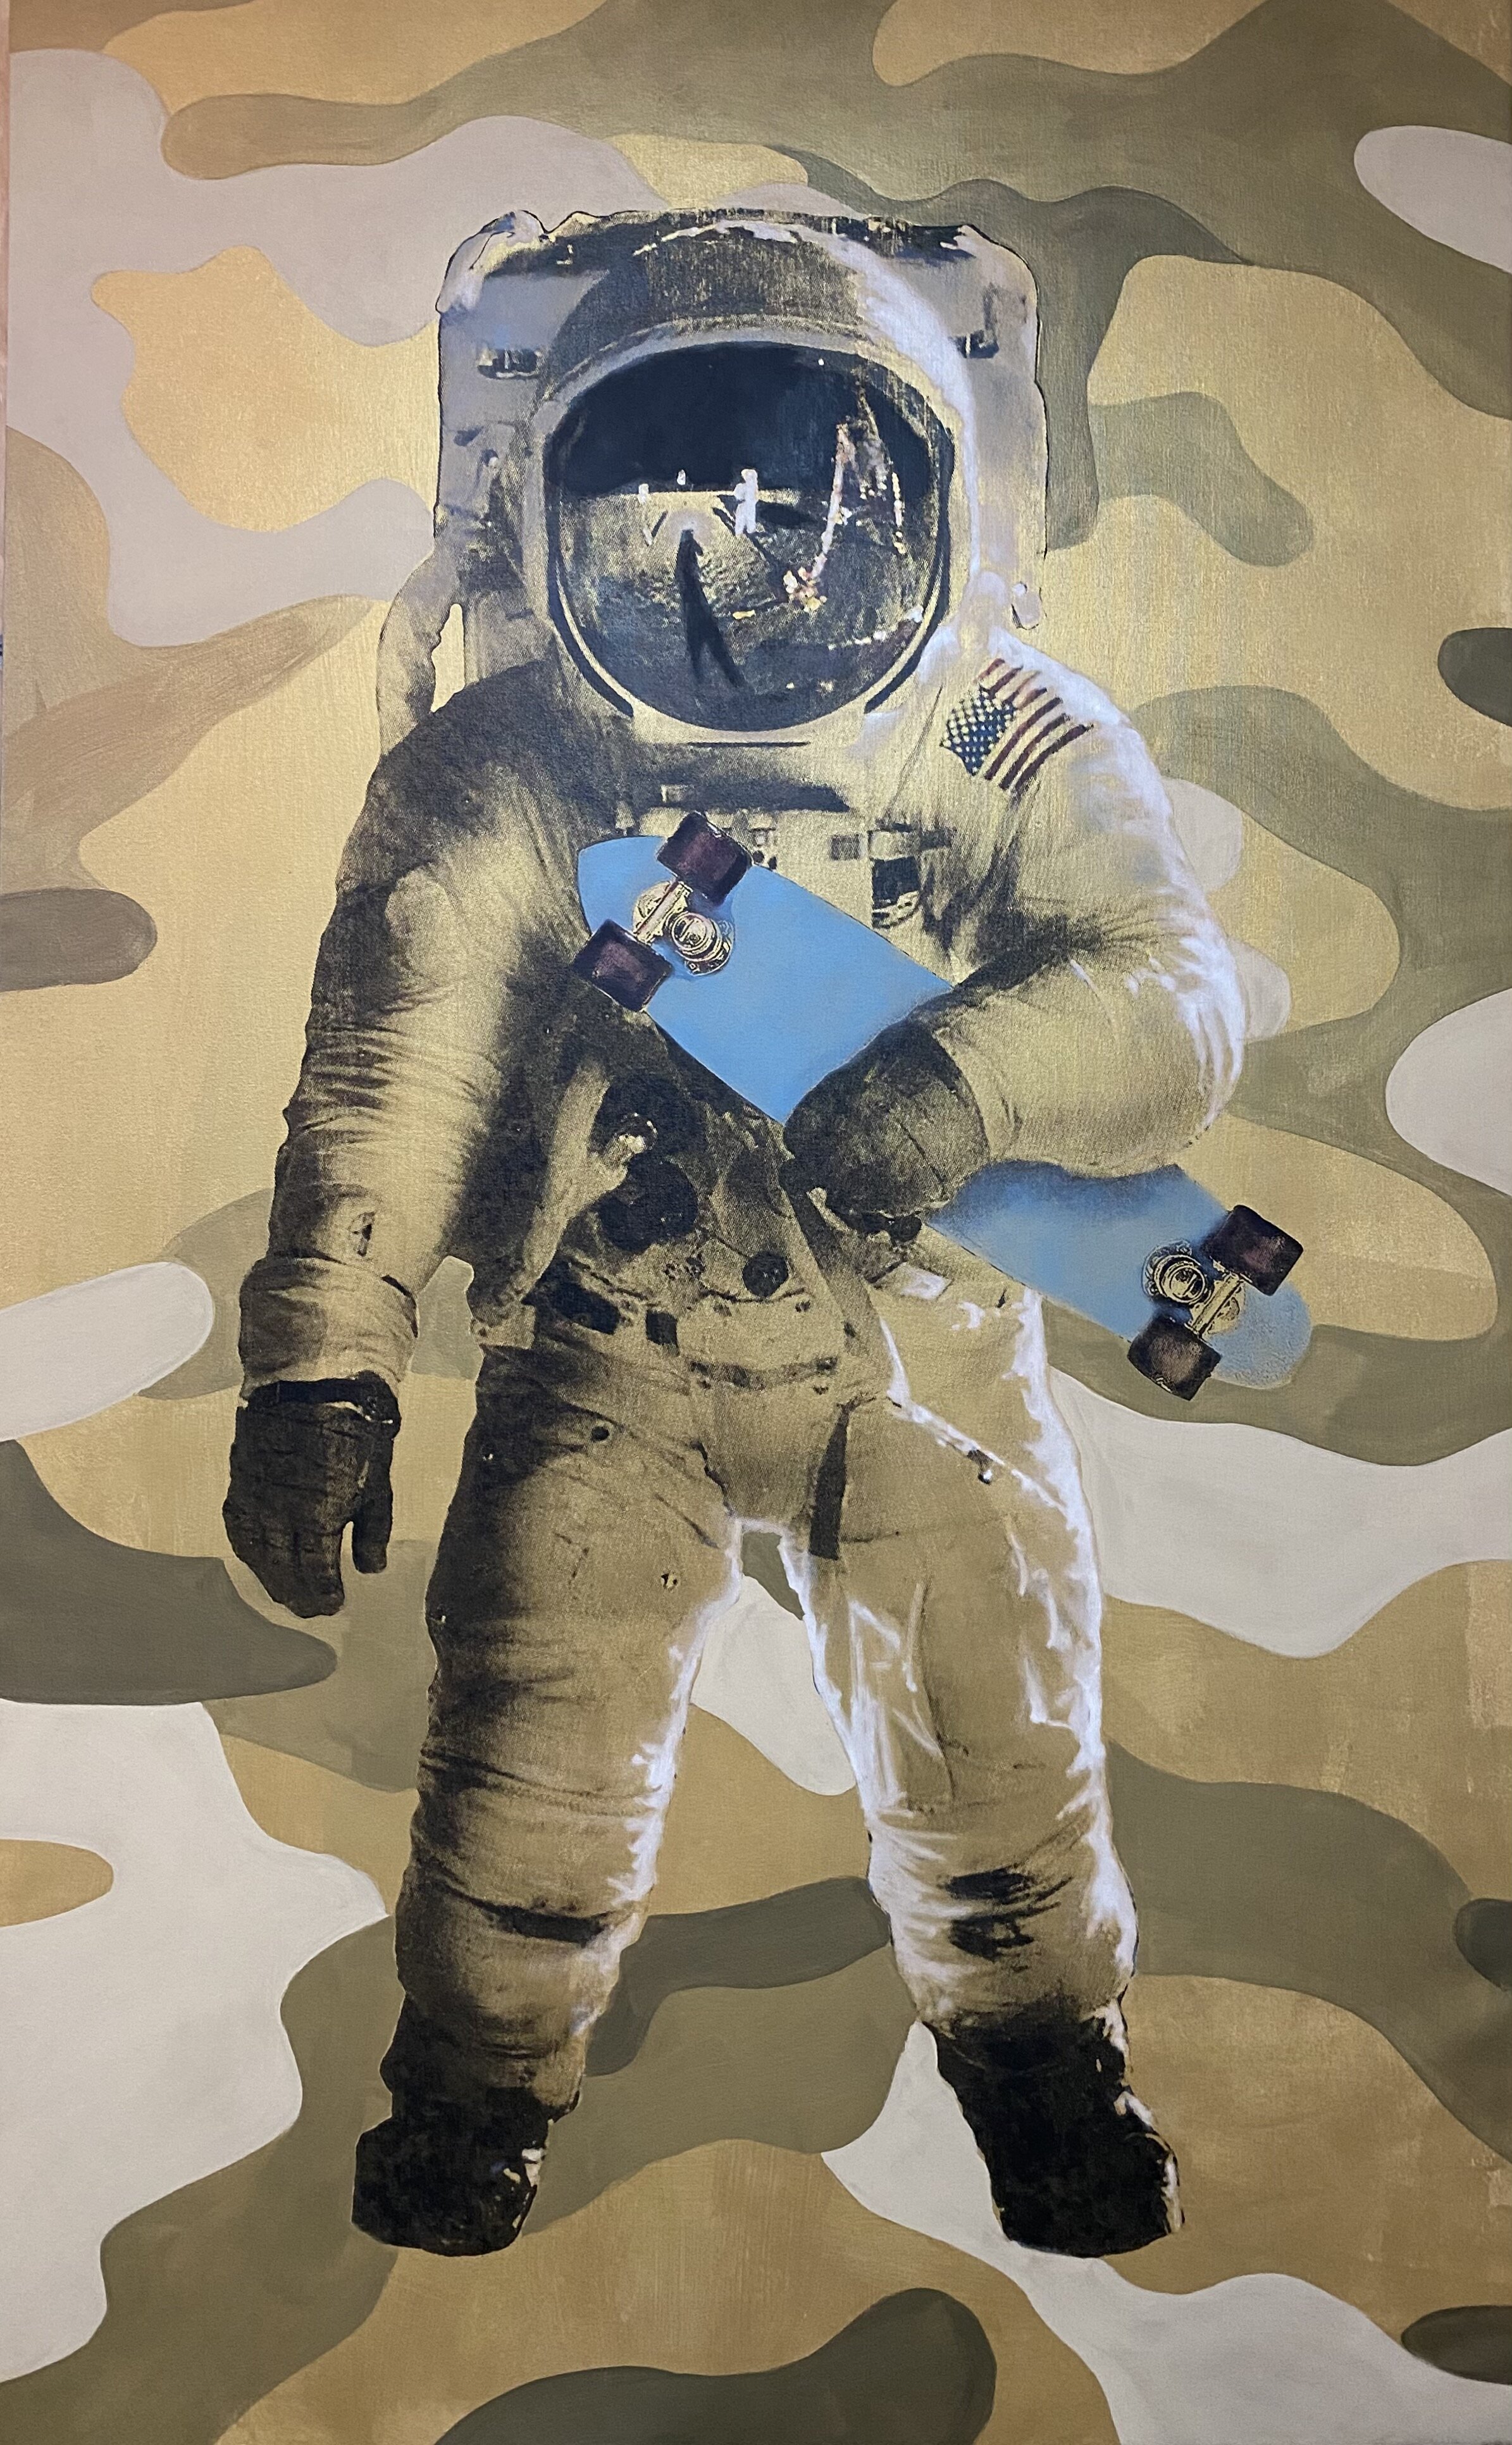   Camo Spaceboarder (Gold), 2021   Screen print and acrylic on canvas, 78 x 48 inches 